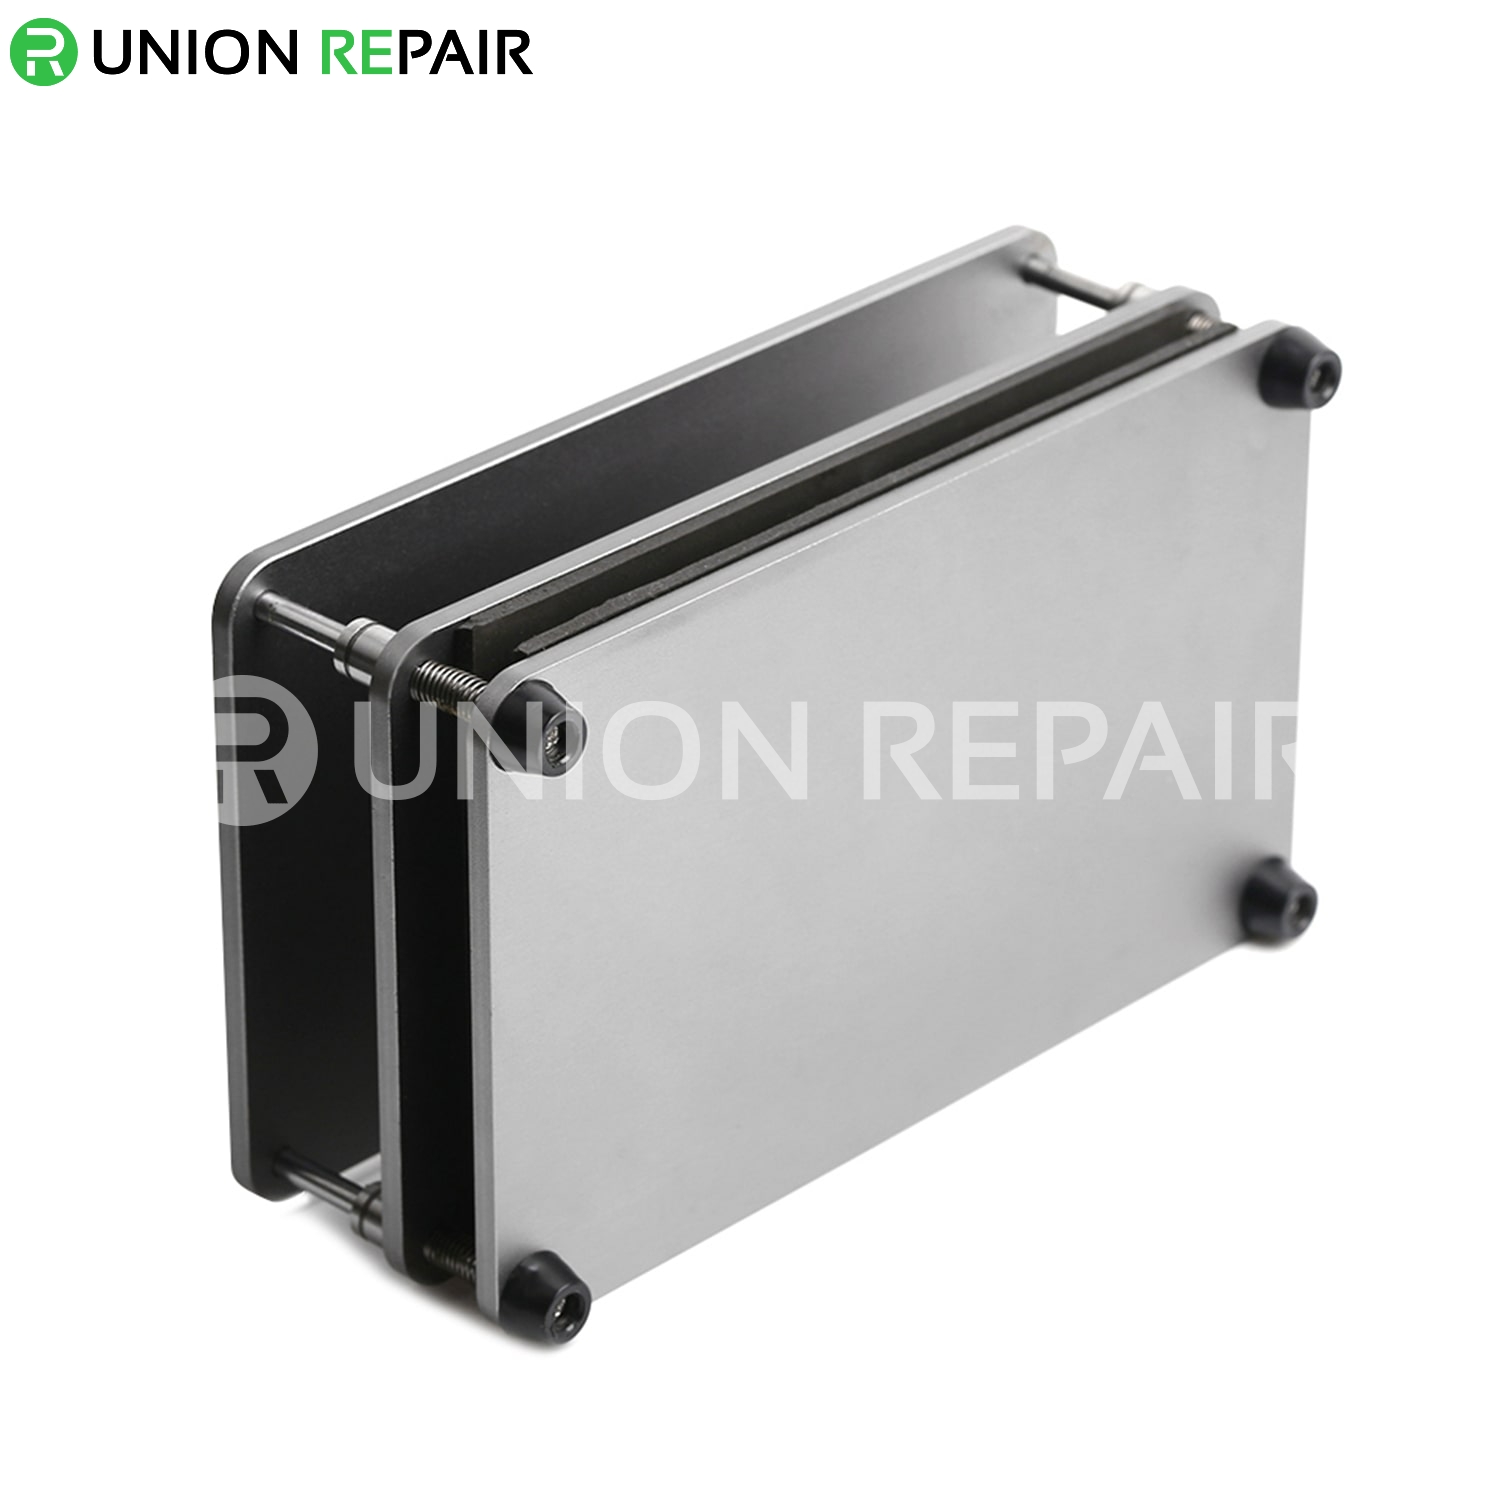 TBK Universal Back Cover Press Mould Fixture for TBK958A 958B 958C Laser Separator Machine